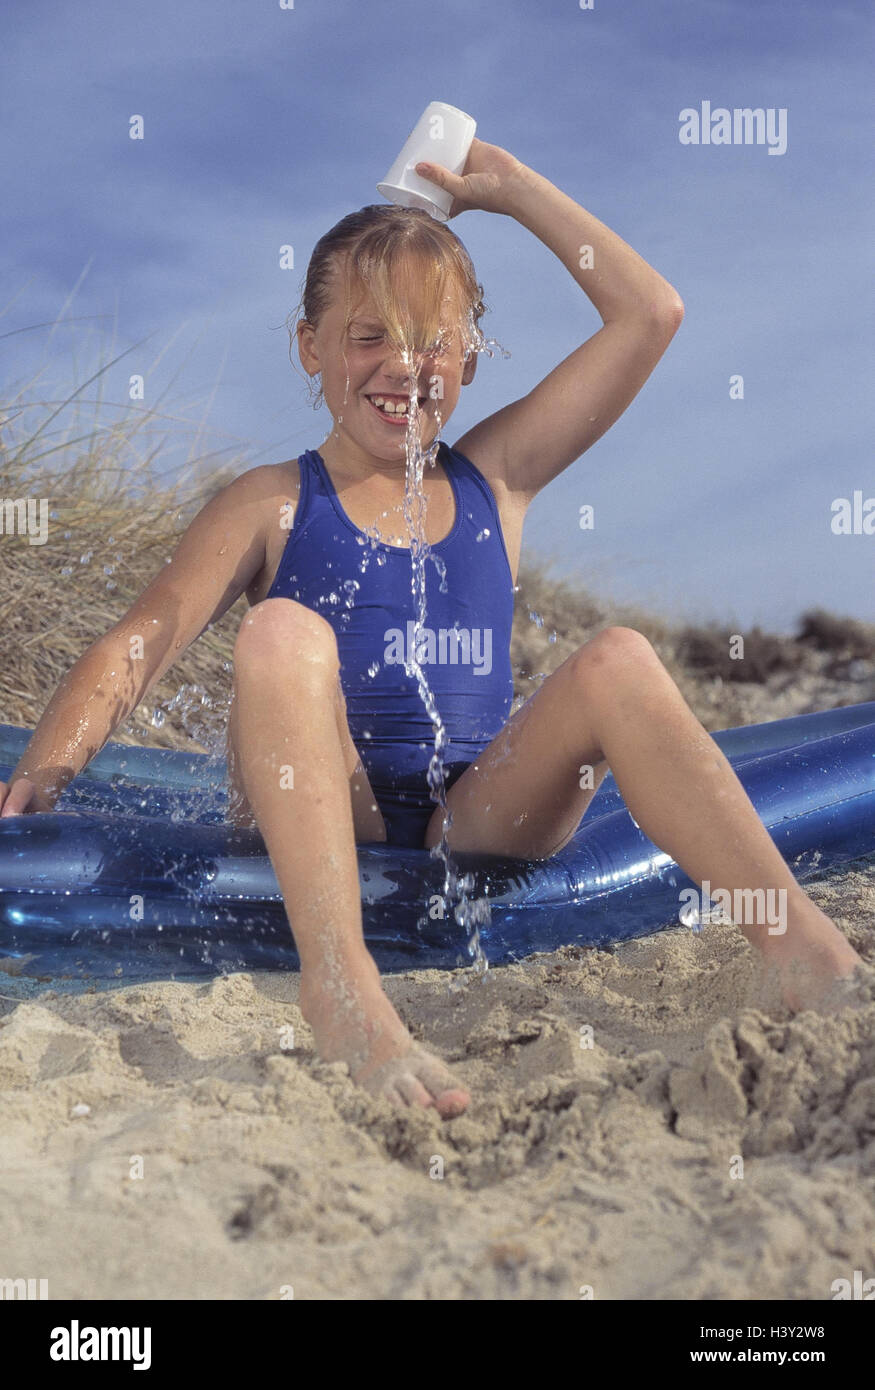 Air bed, girl, sit, pour over mug, water, detail, outside, summers, leisure time, childhood, vacation, holidays, beach, sandy beach, fun, smile, cool, happy, 9 years, cooling, refresh, refreshment, mug, swimsuit, swimwear, very close Stock Photo